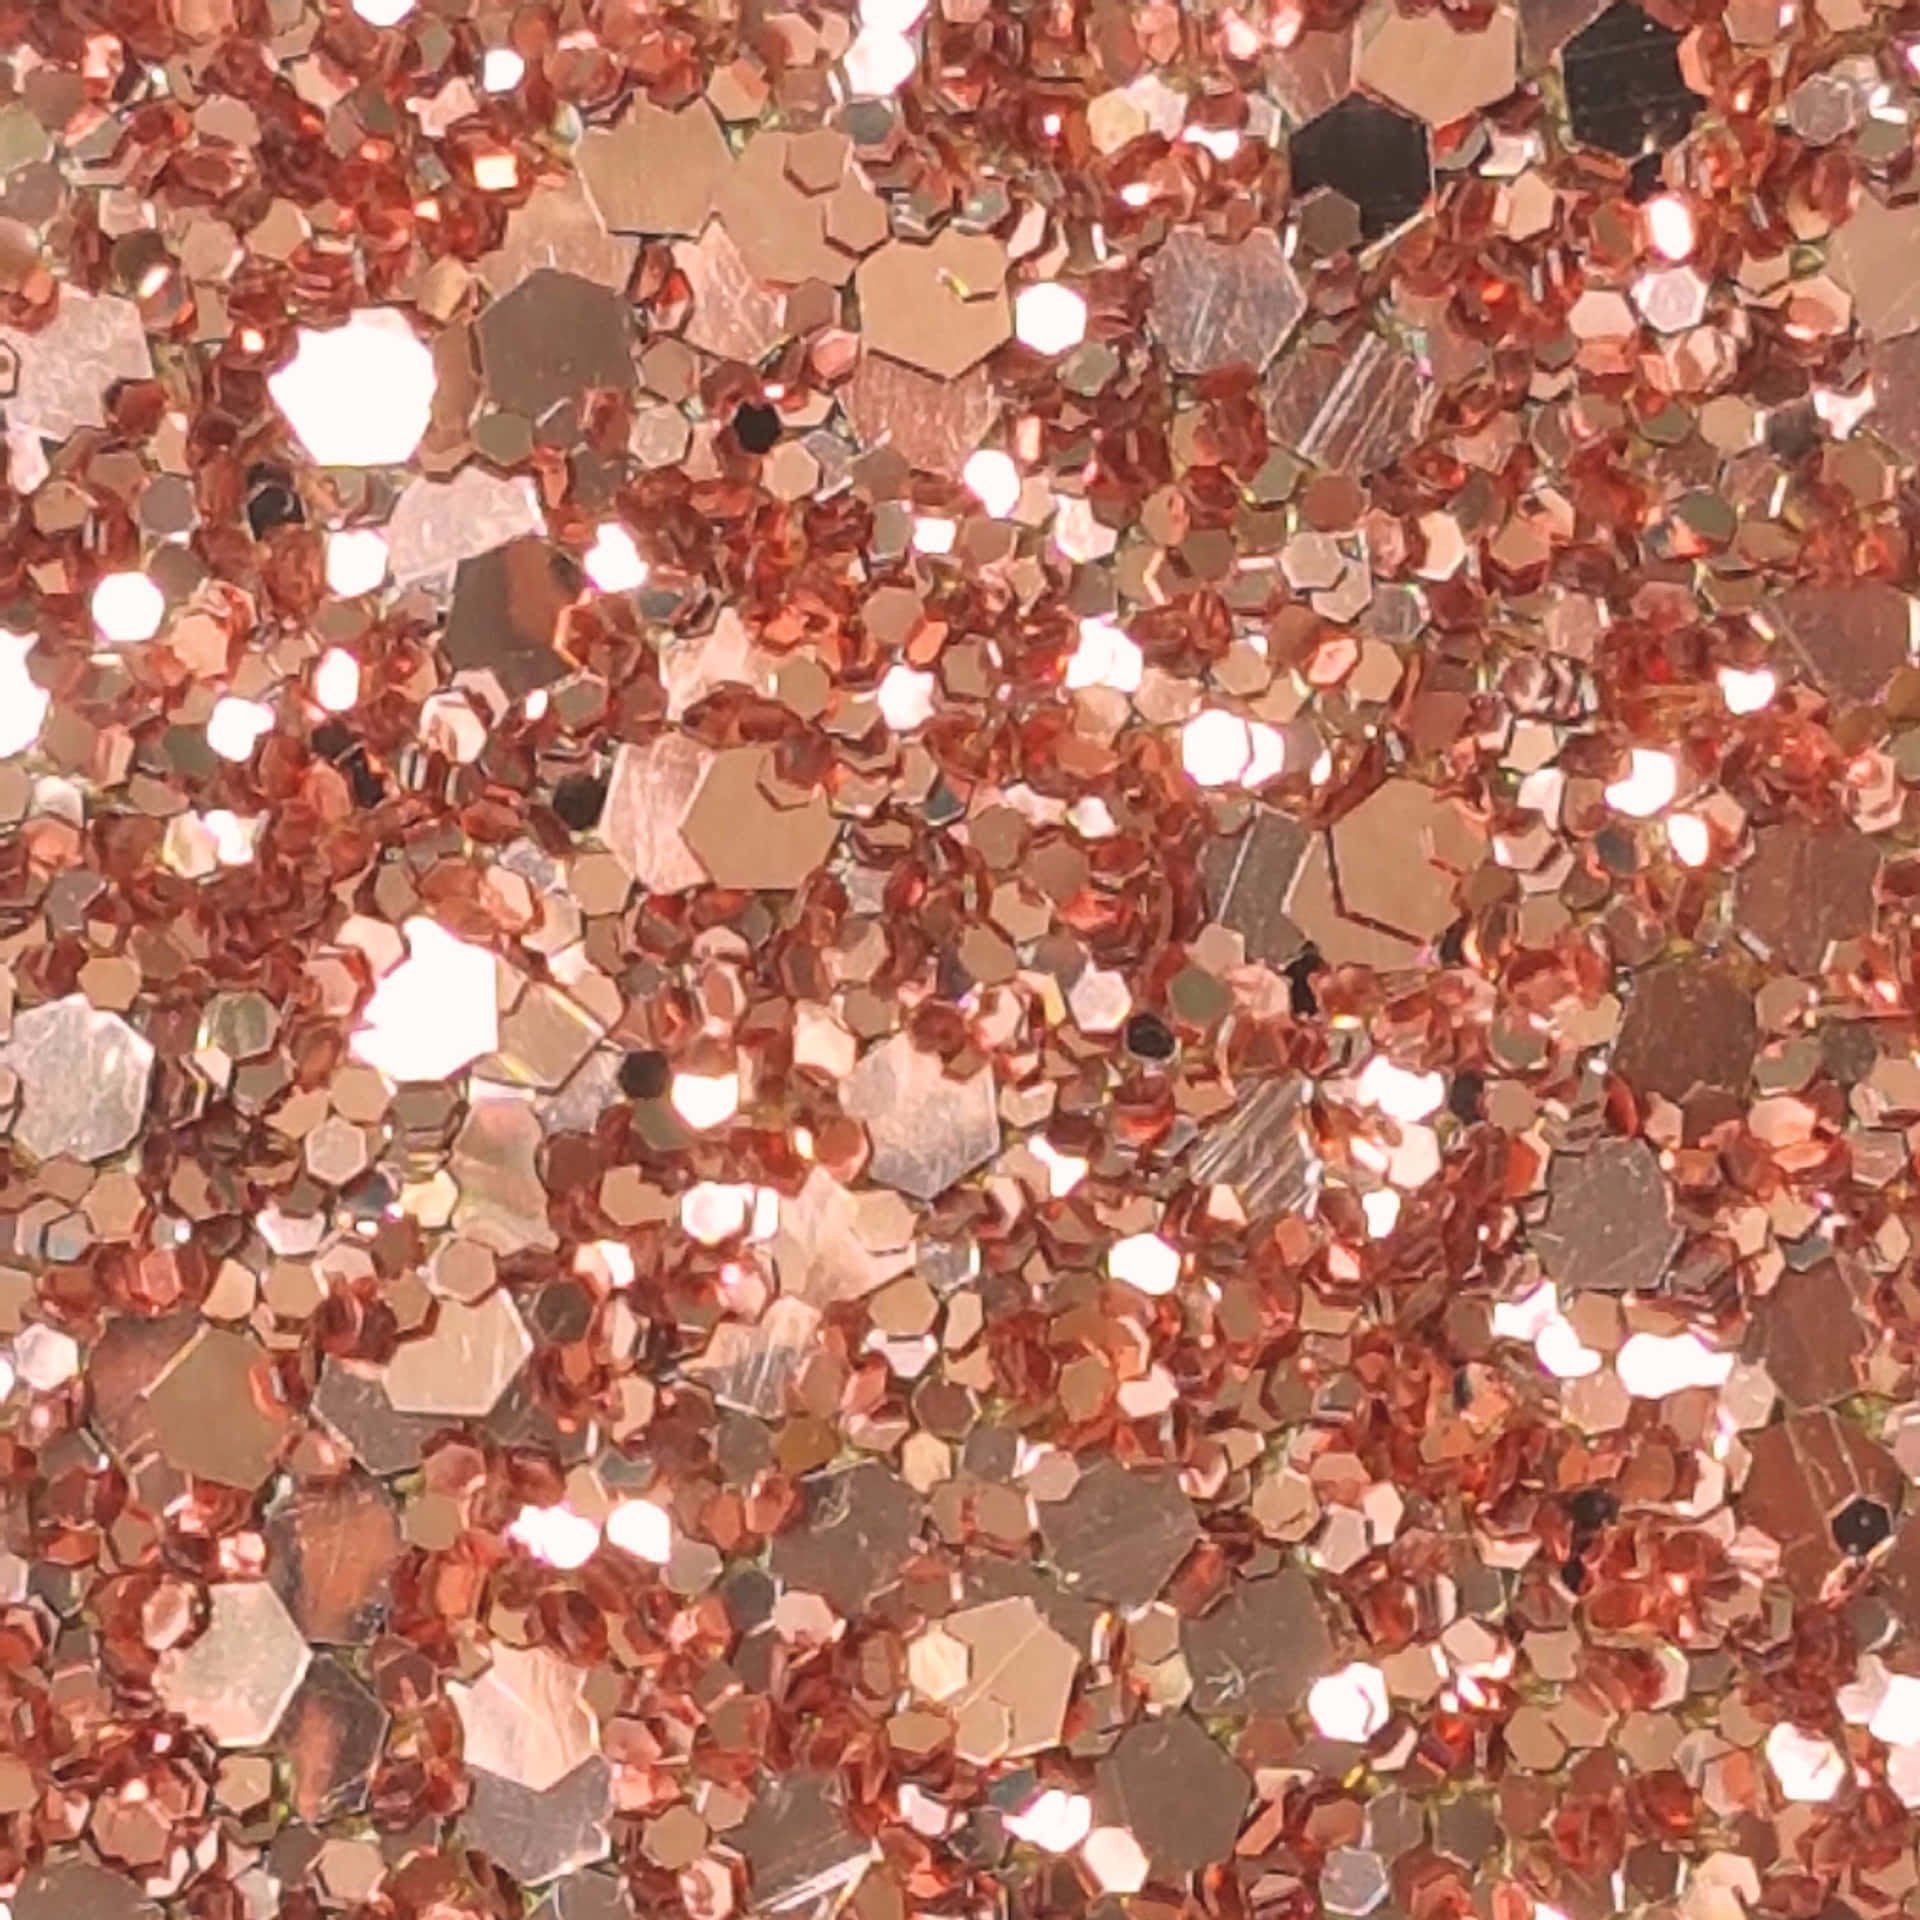 Let the sparkles of rose gold brighten up your day!